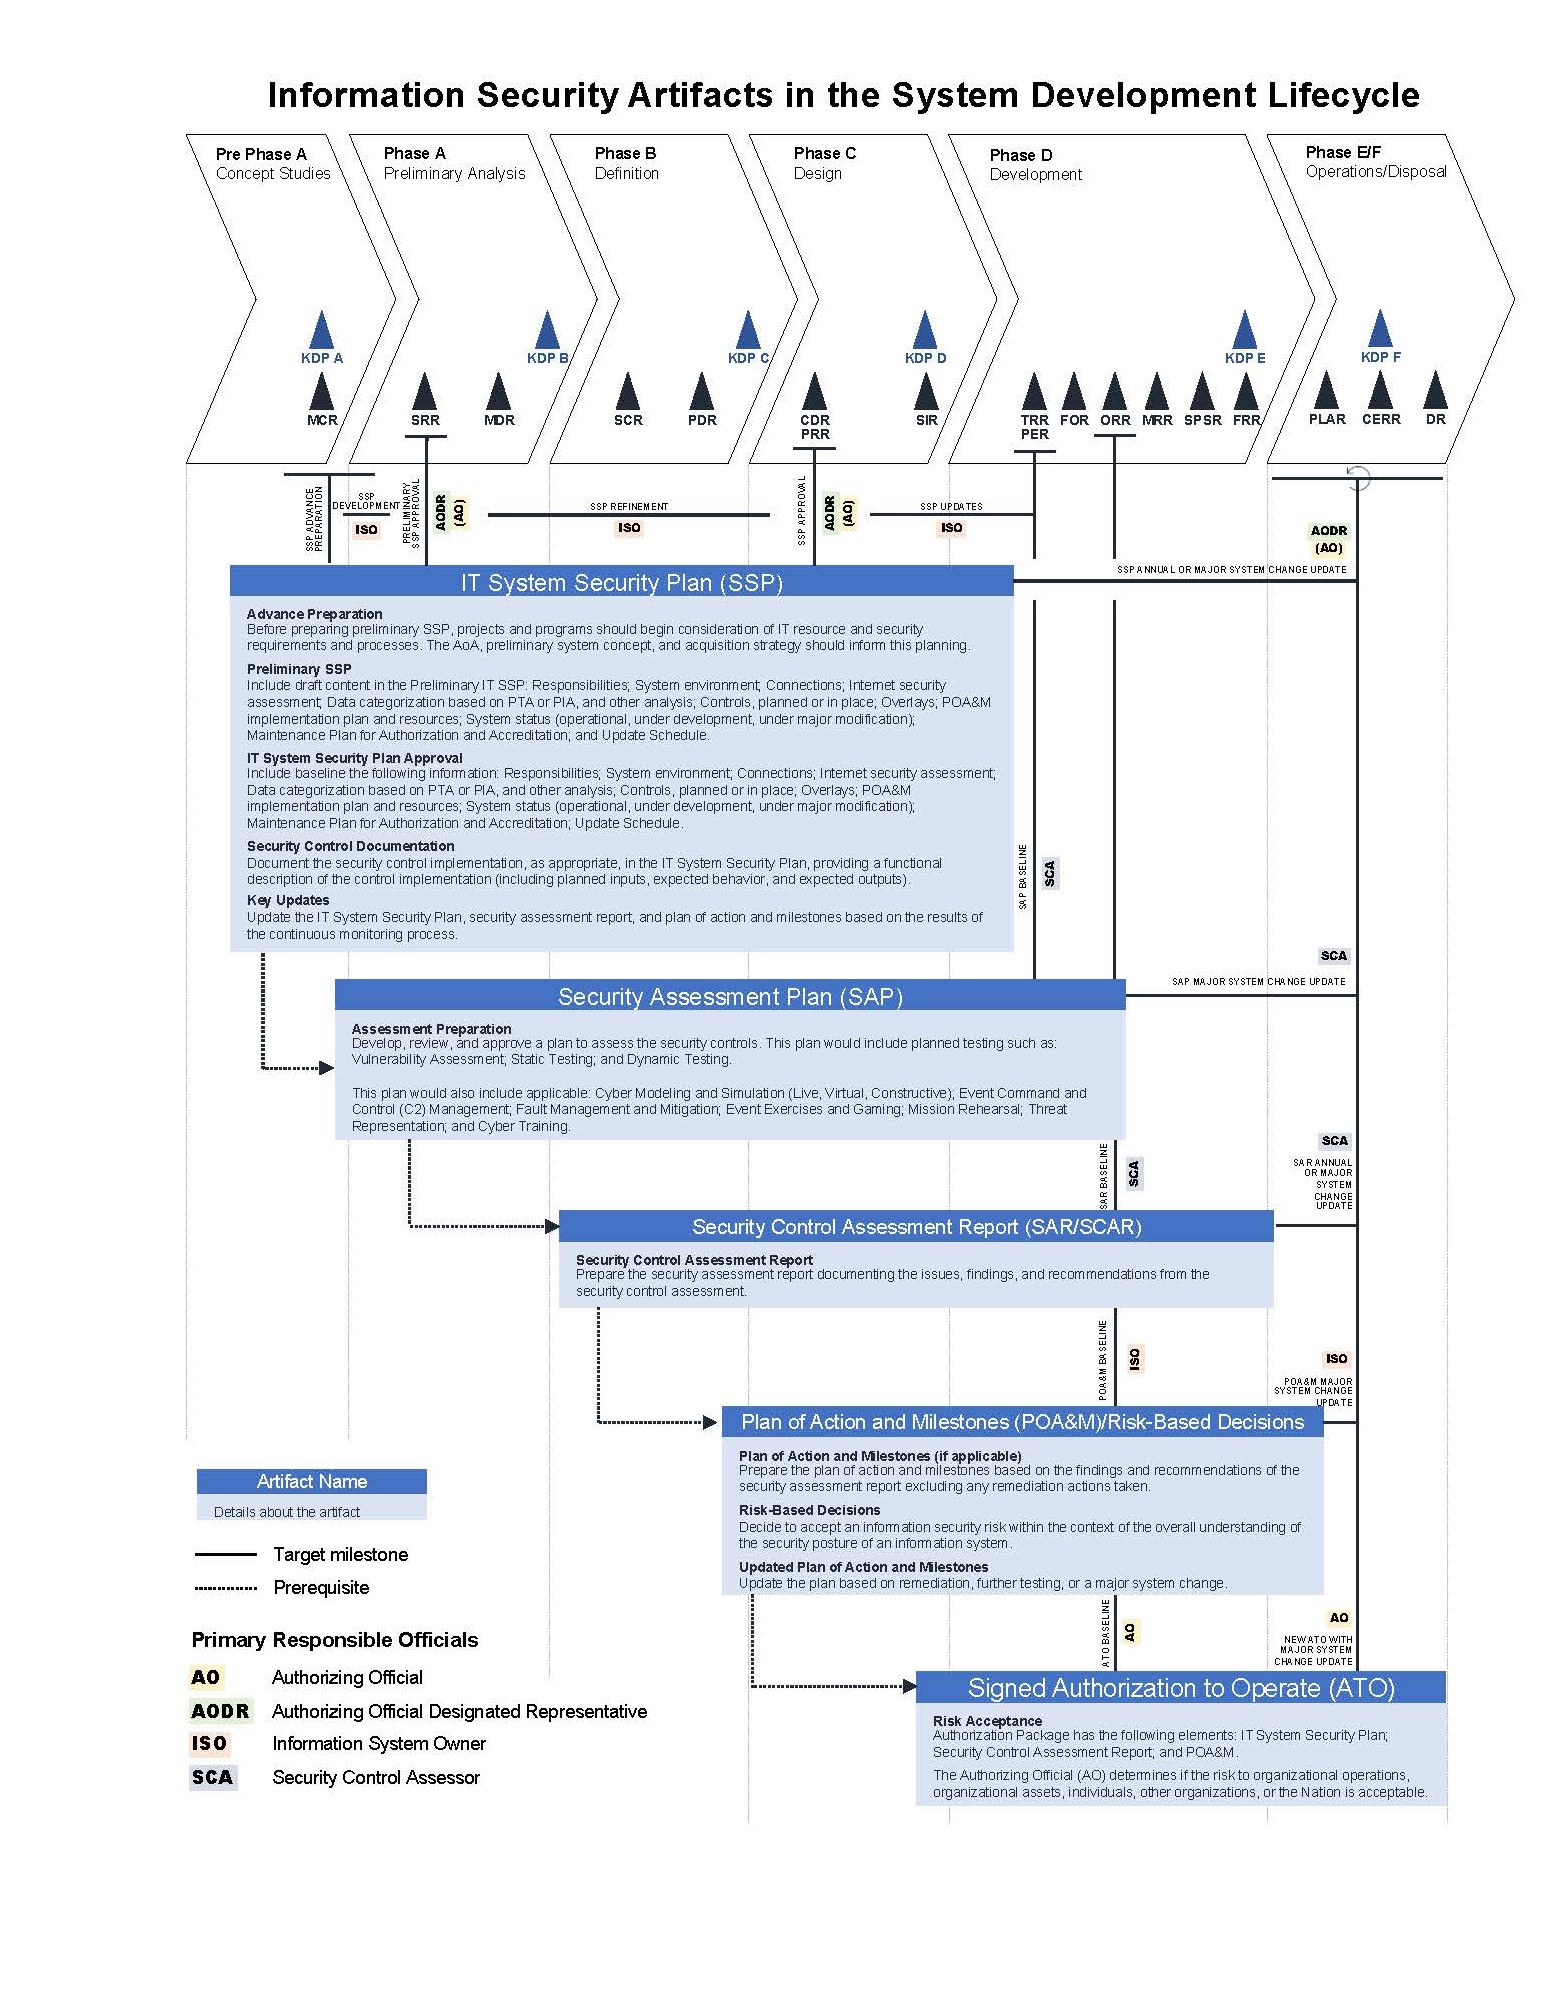 Figure E 1 provides a visual representation of the information security artifacts related to the program or project lifecycle.